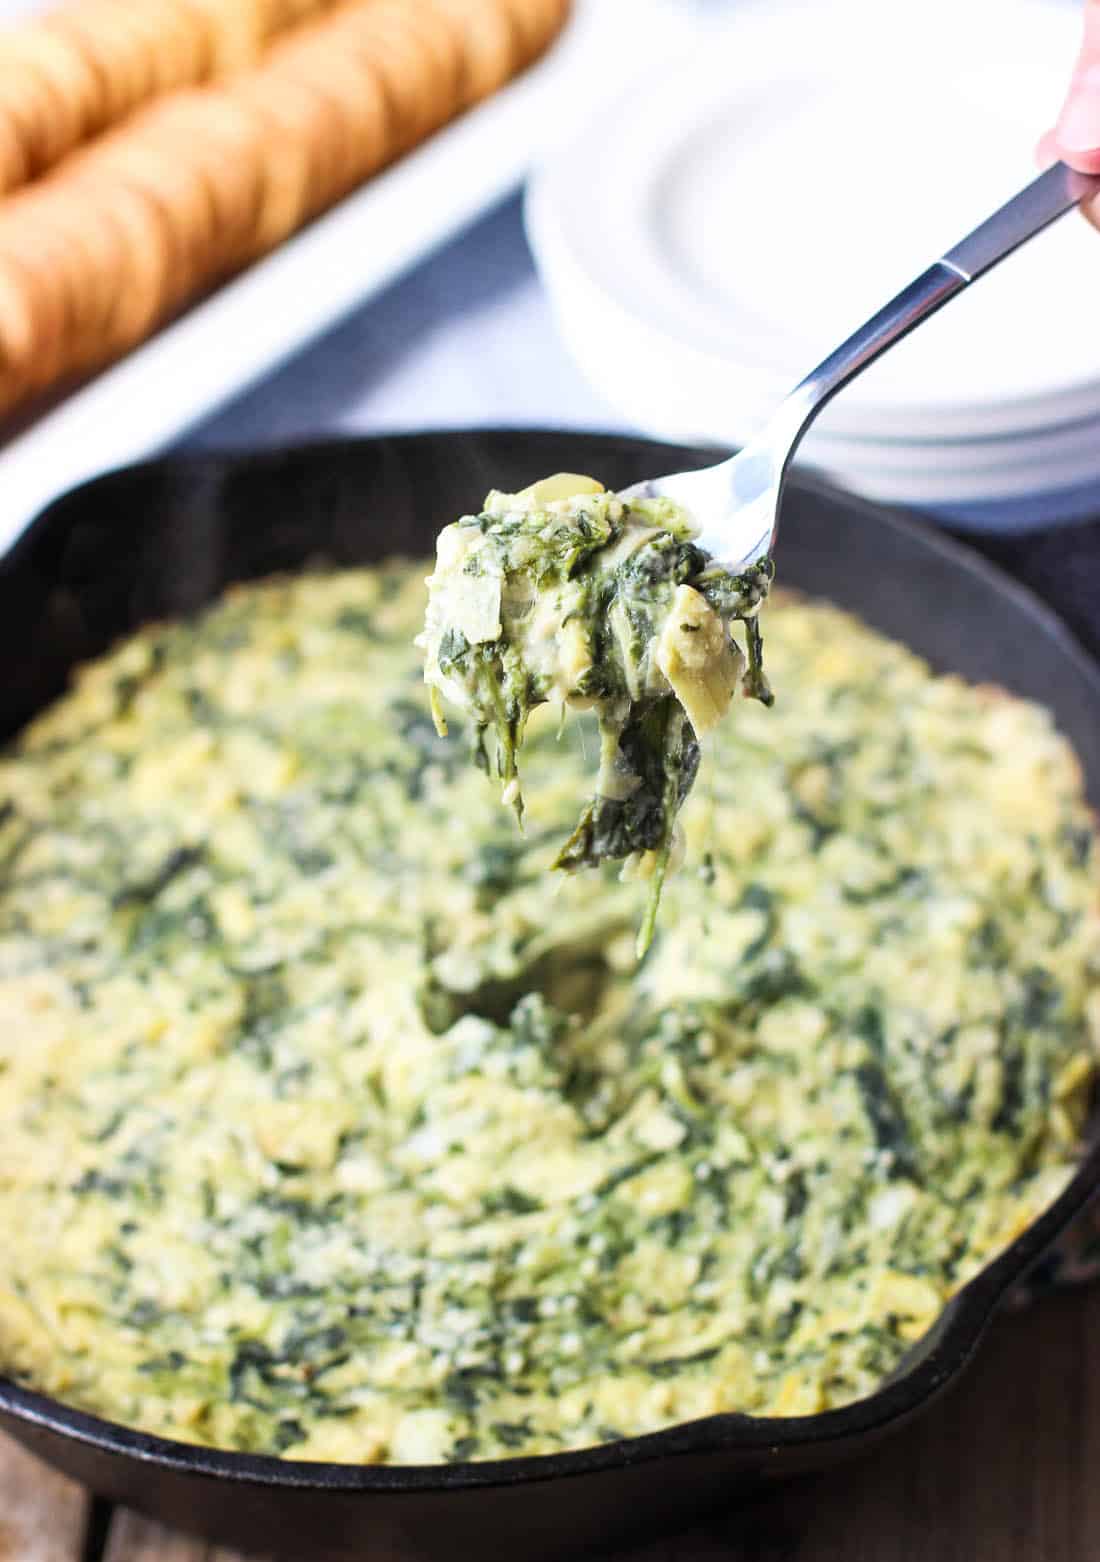 A spoon holding up a scoop of spinach artichoke dip from the dish.